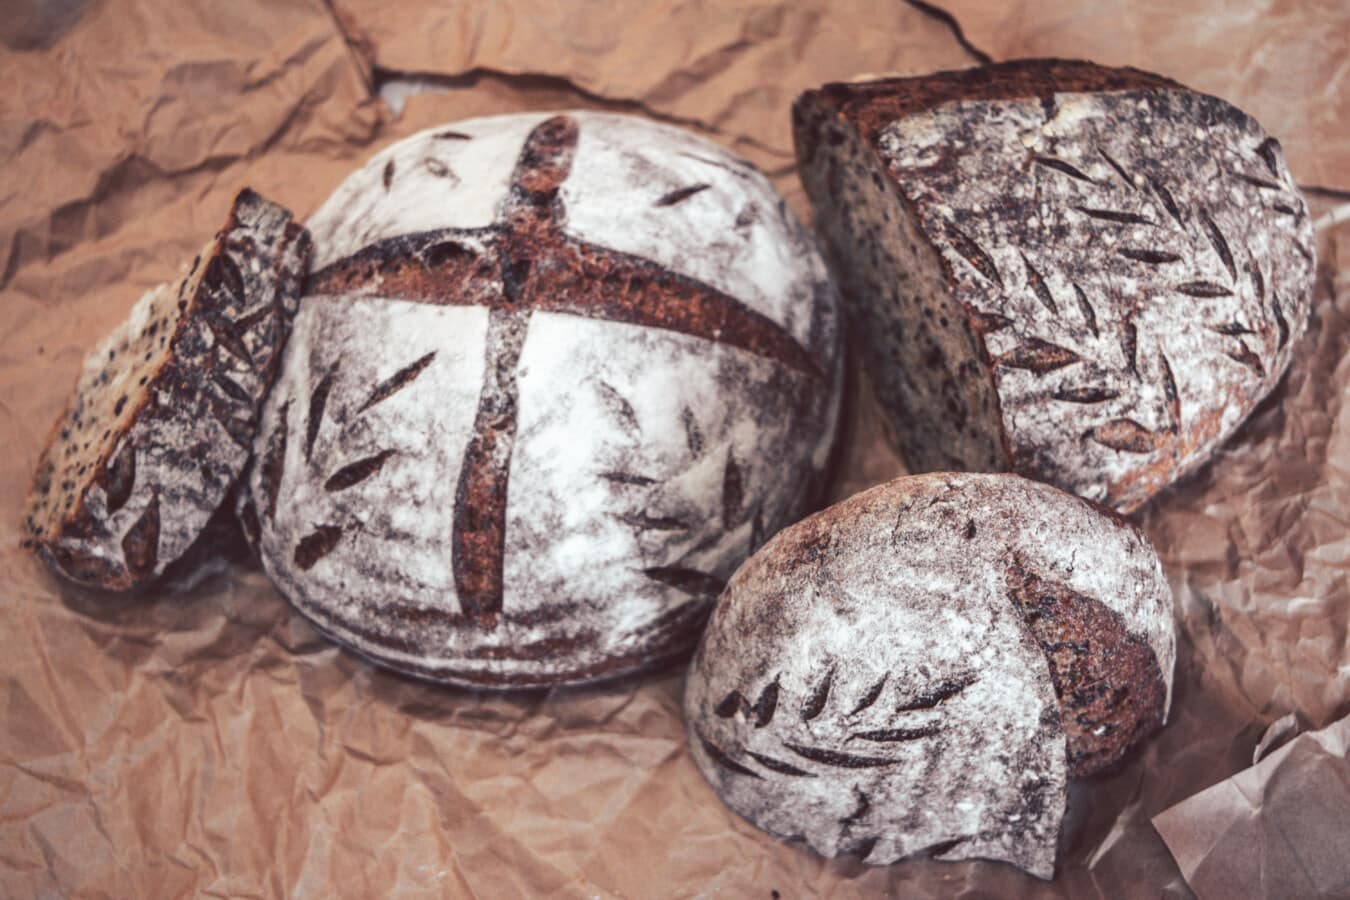 baked goods, bread, wholemeal bread, traditional, crust, roast, dark, food, old, delicious